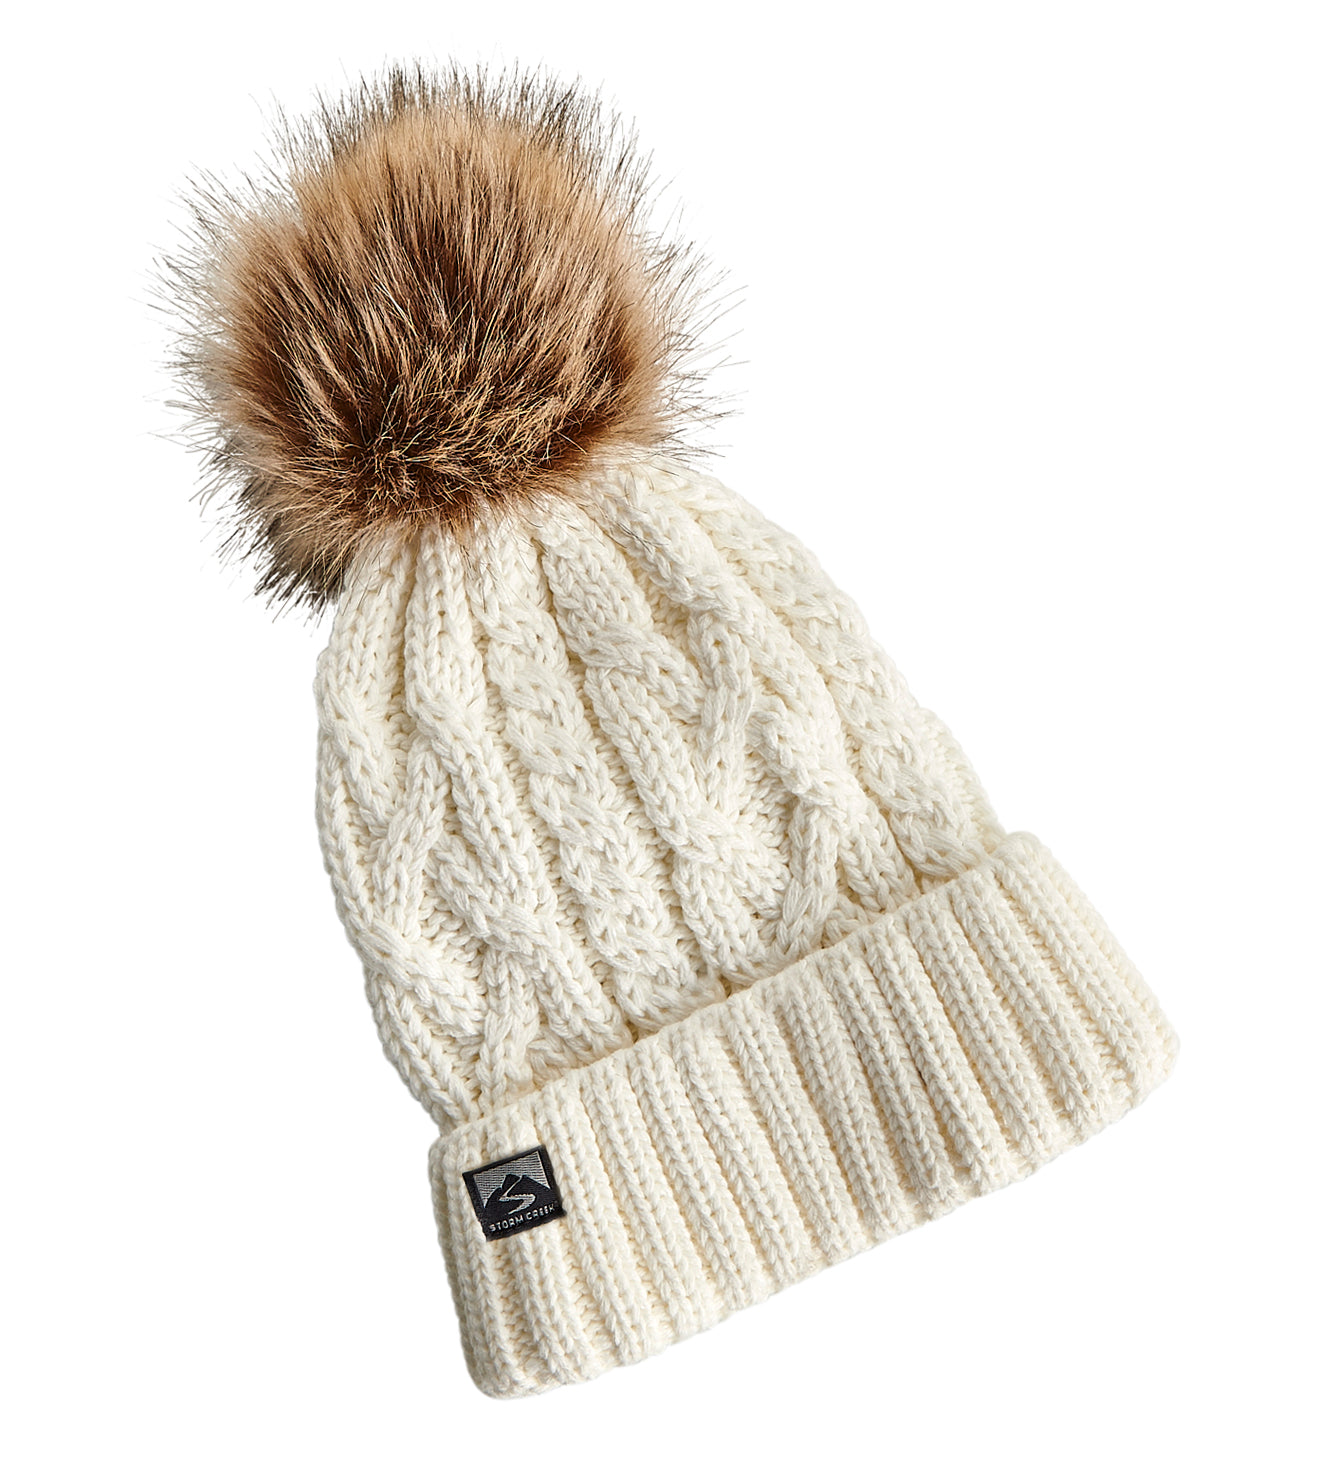 The Show-Off Pom Hat